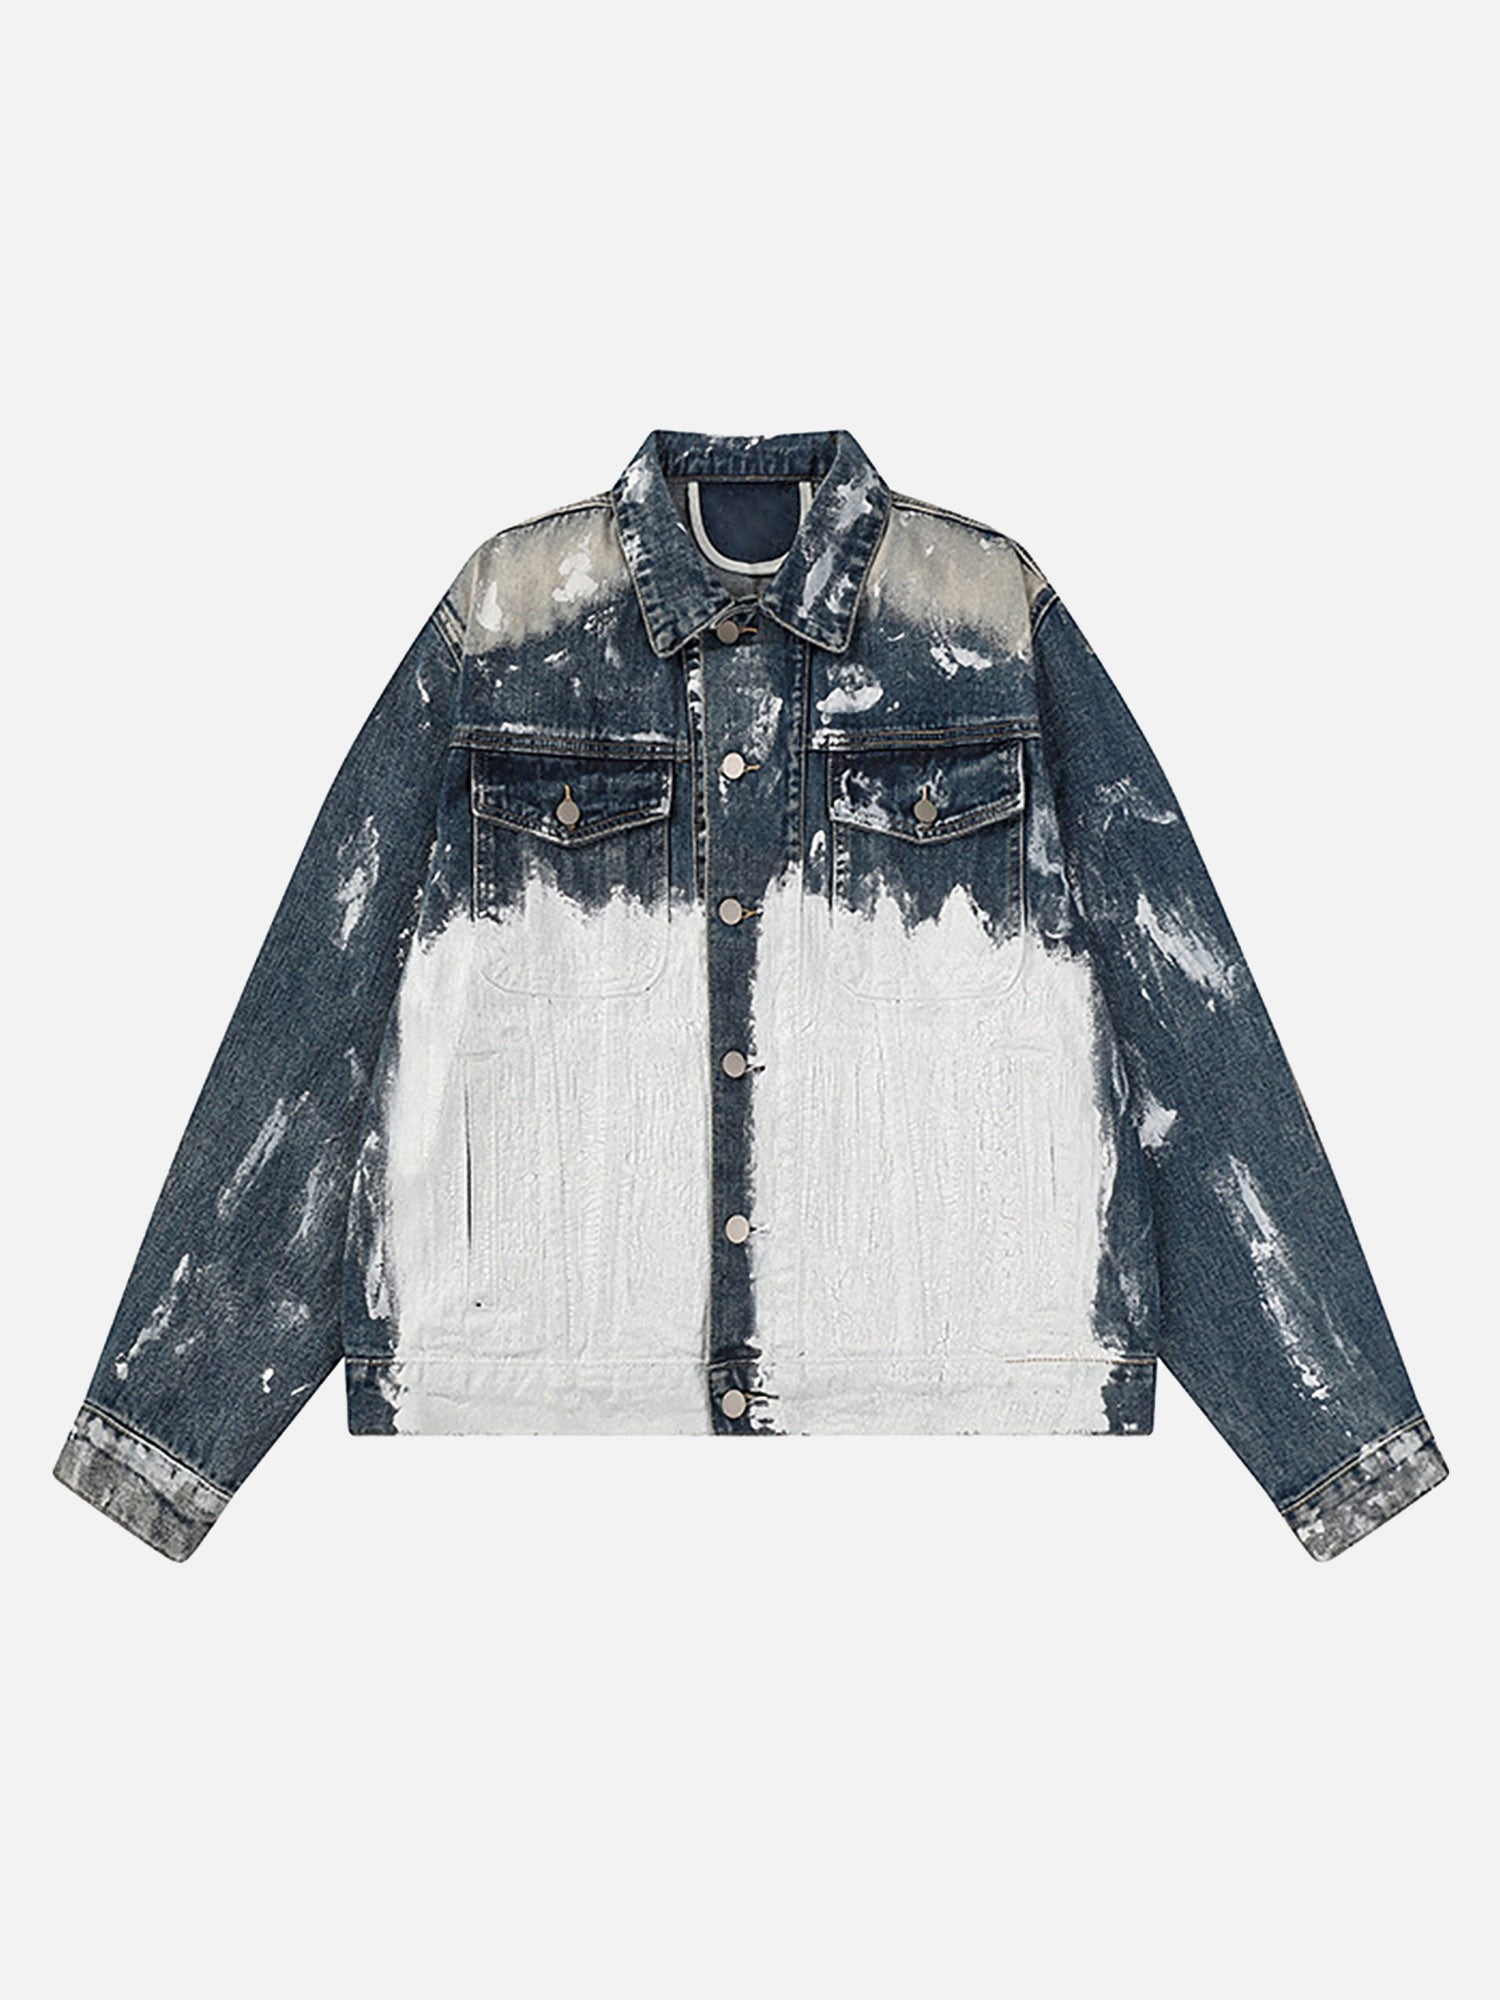 Thesupermade American Street Fashion Heavy Industry Washed Contrast Denim Jacket